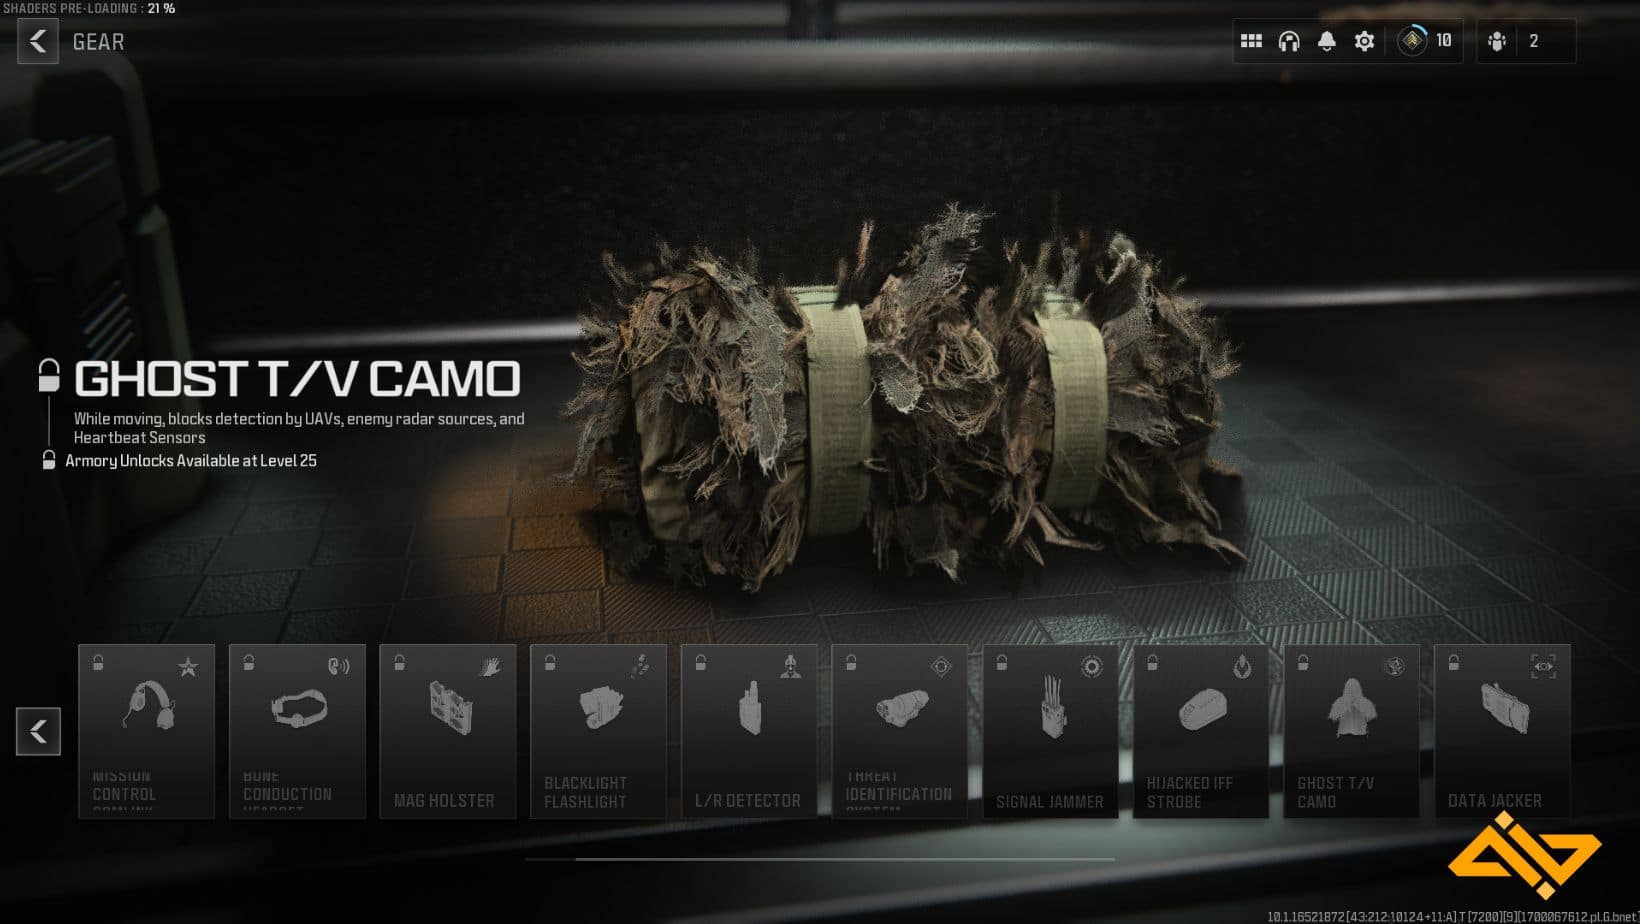 The Ghost TV Camo allows you to block detection from UAVs, enemy radar sources, and Heartbeat Sensors.